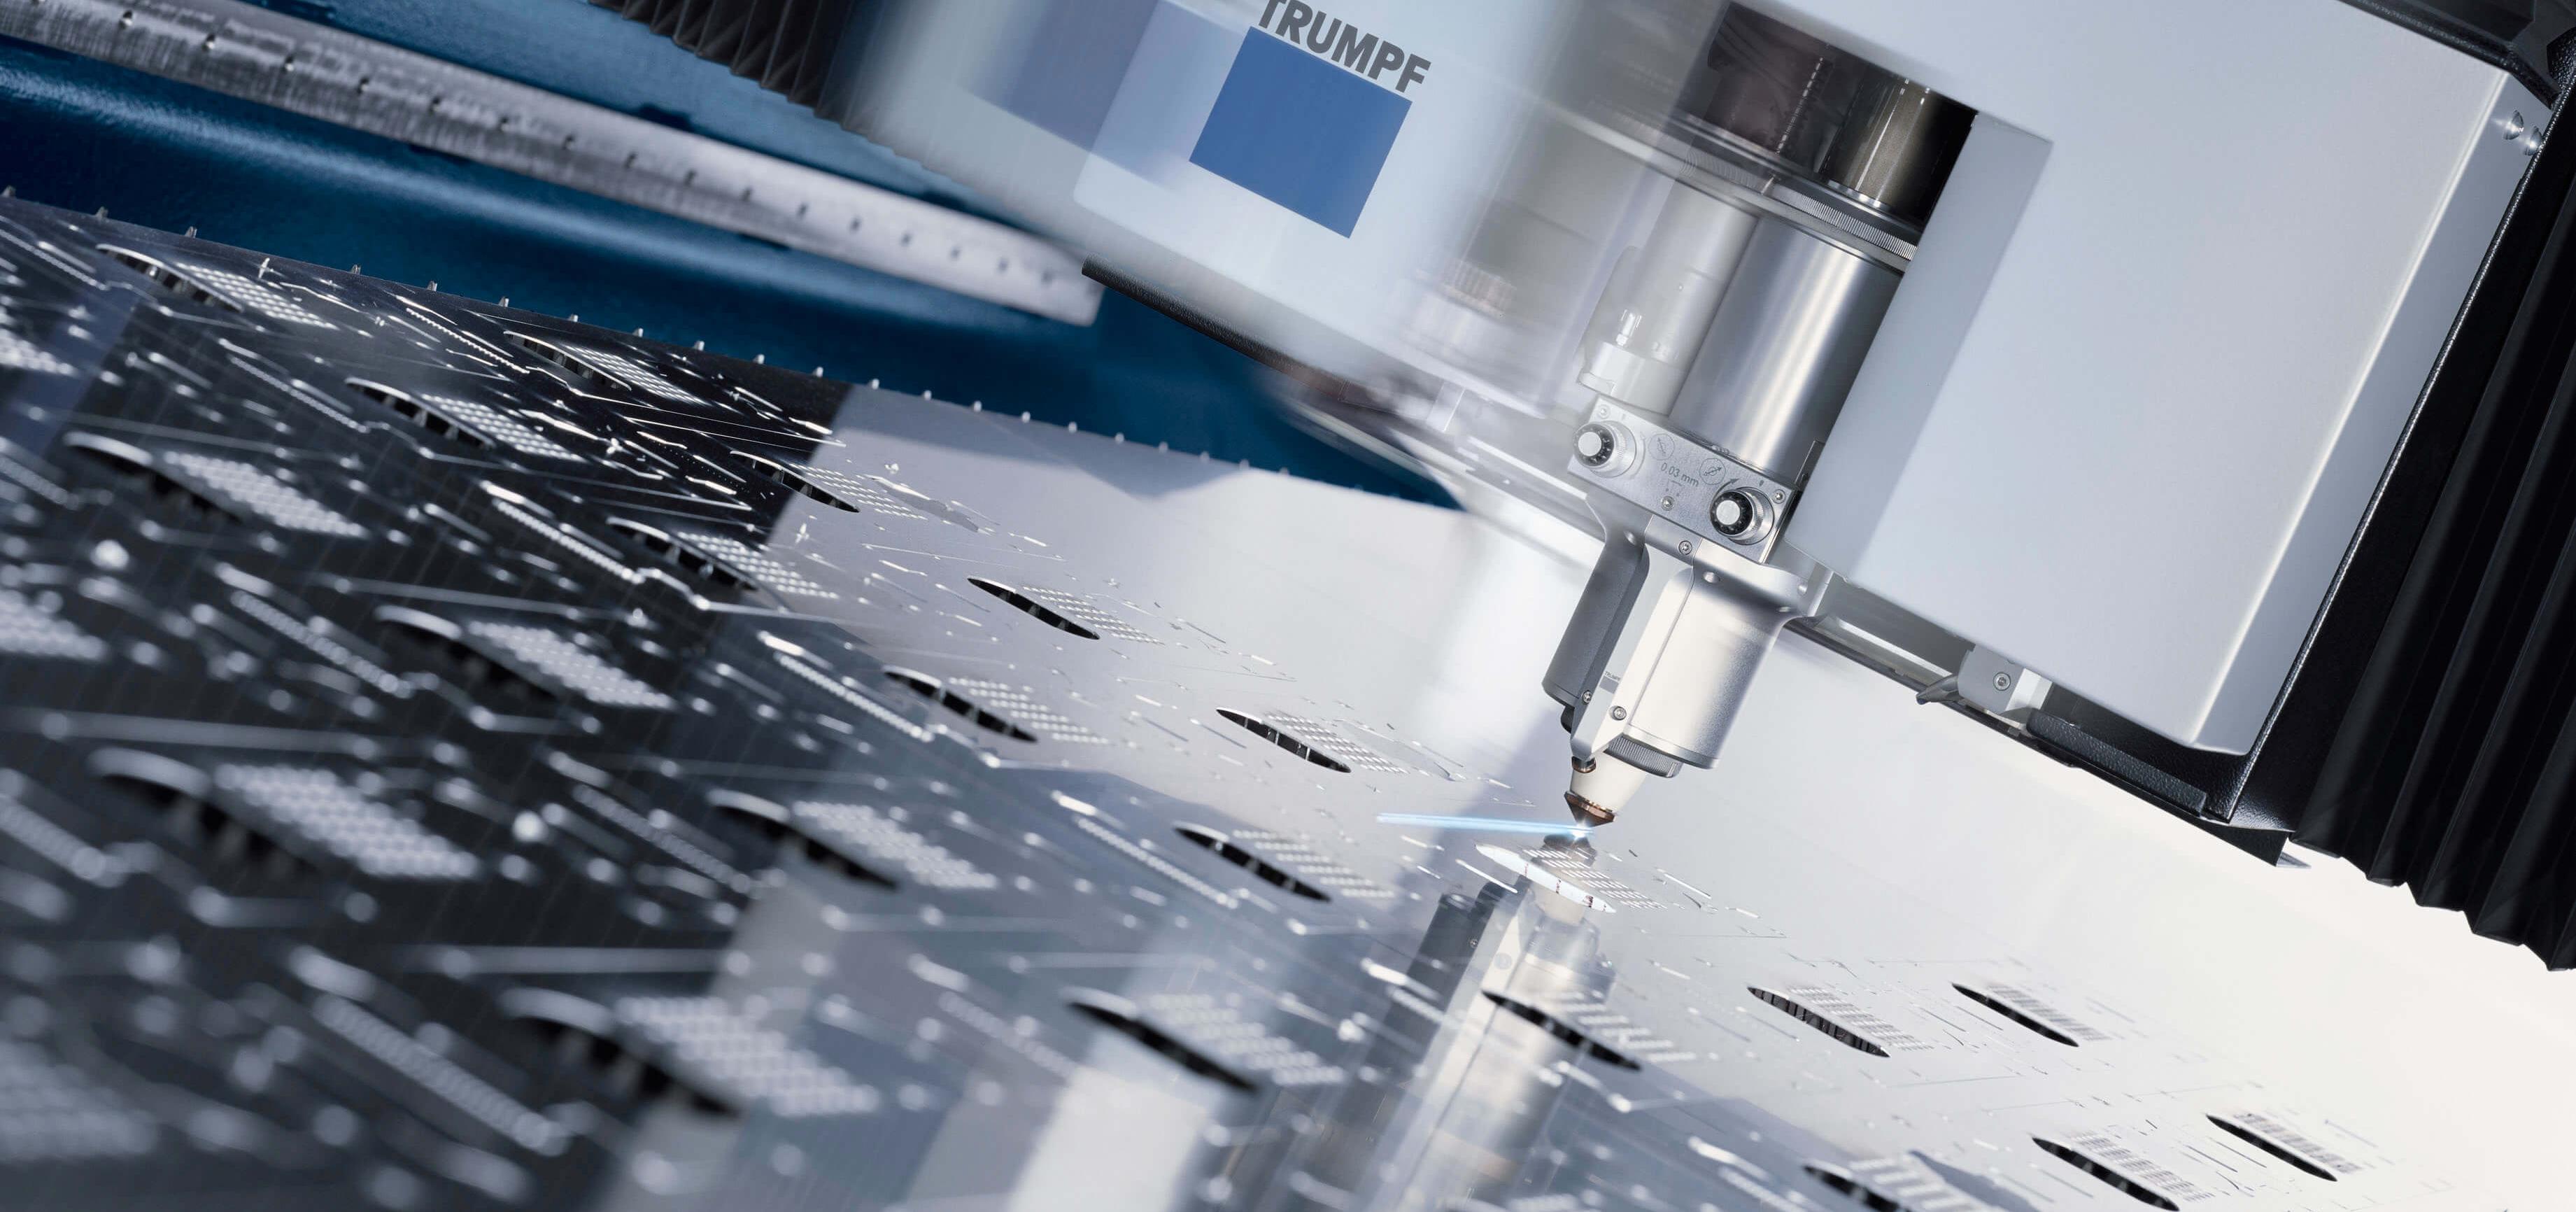 Metal Laser Cutting: Choosing the Right Materials for Precision and Quality